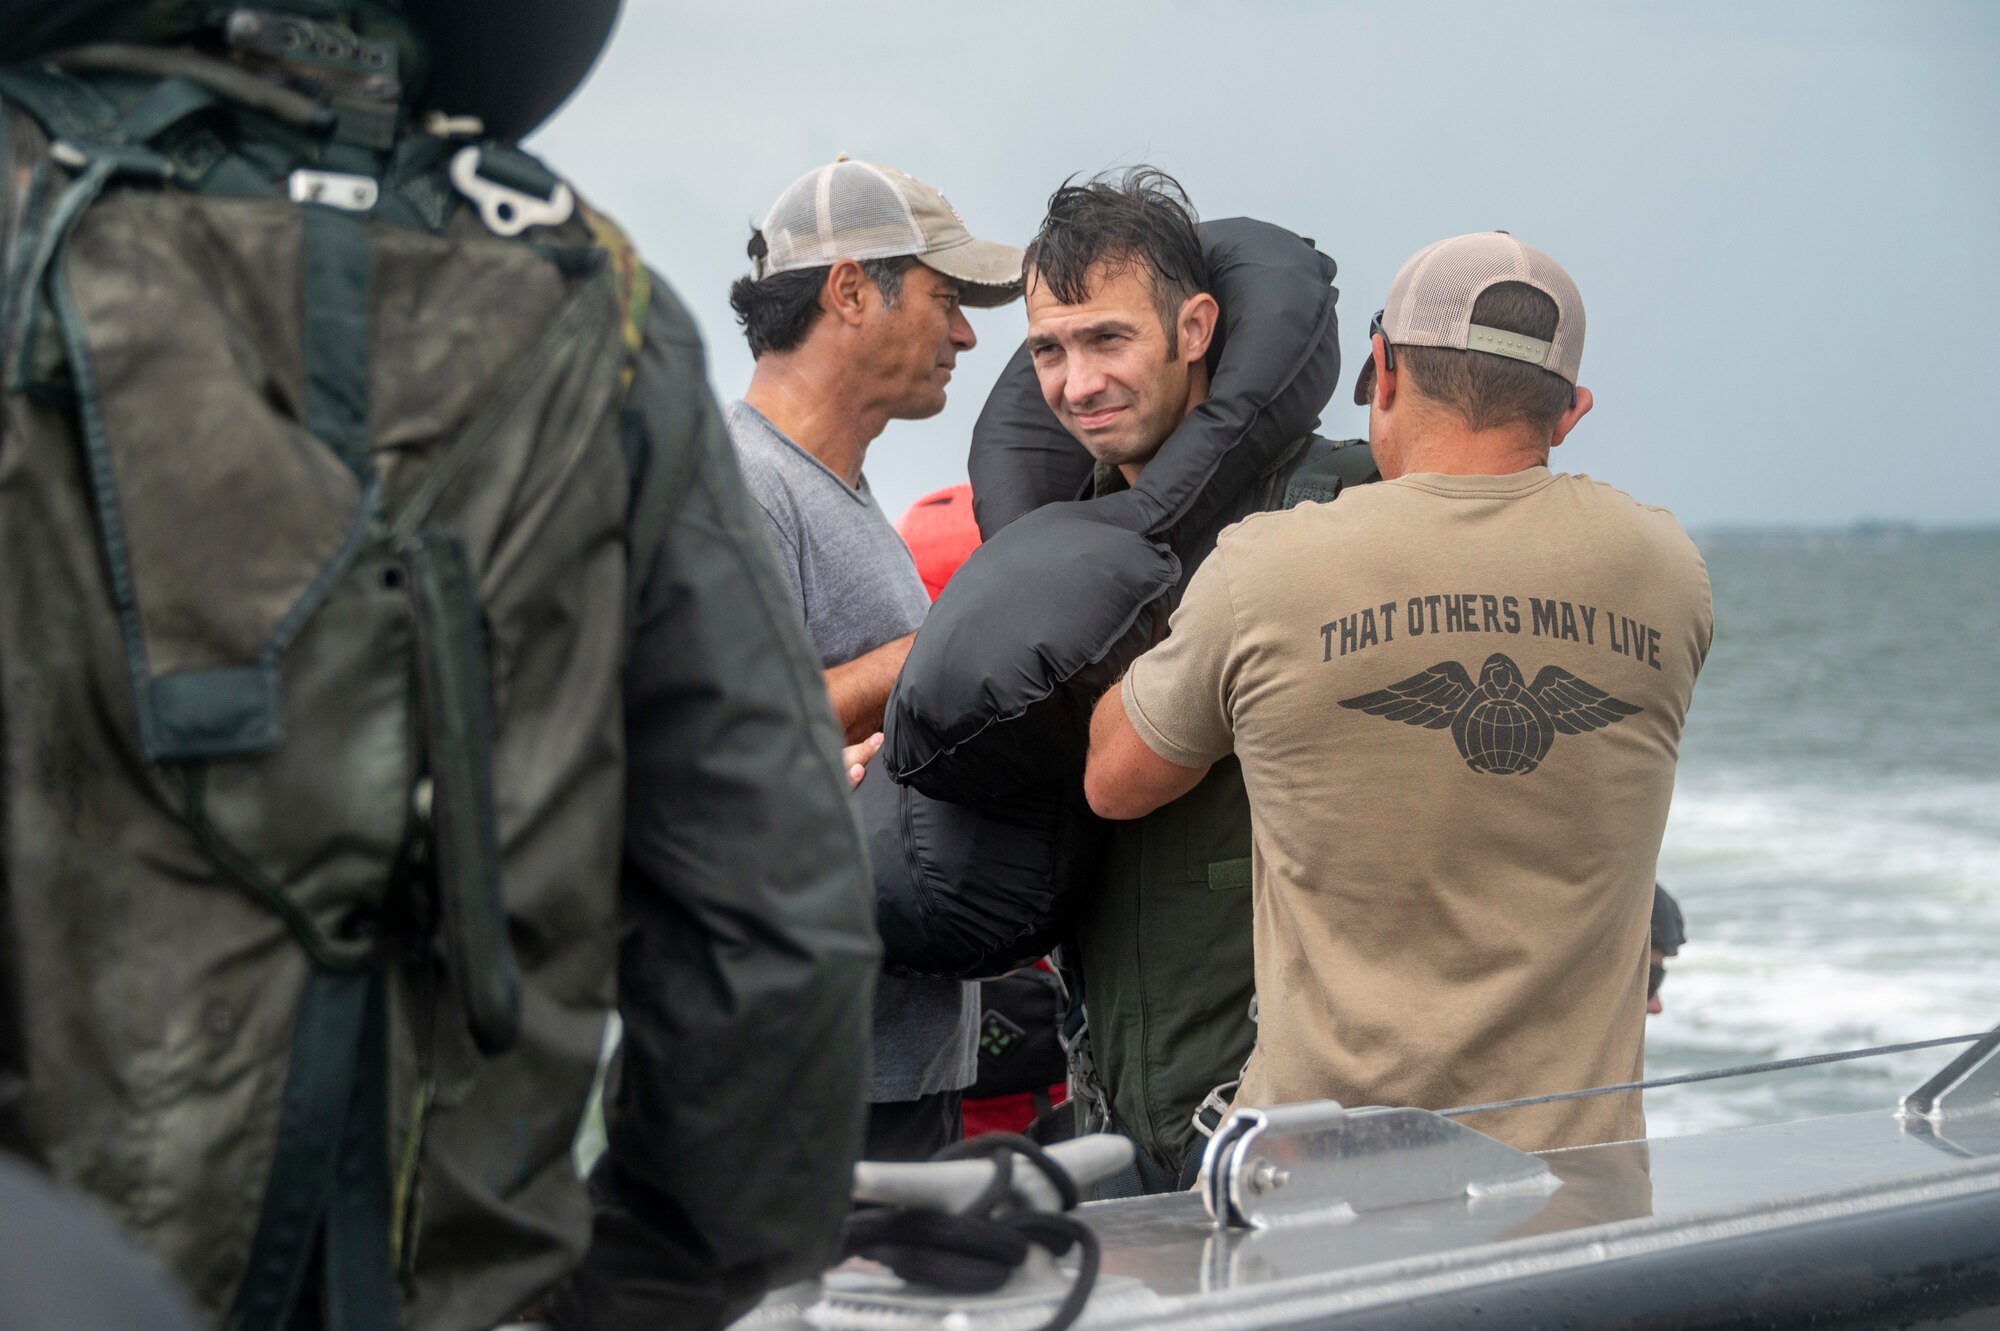 Photo of Airmen in life jacket.